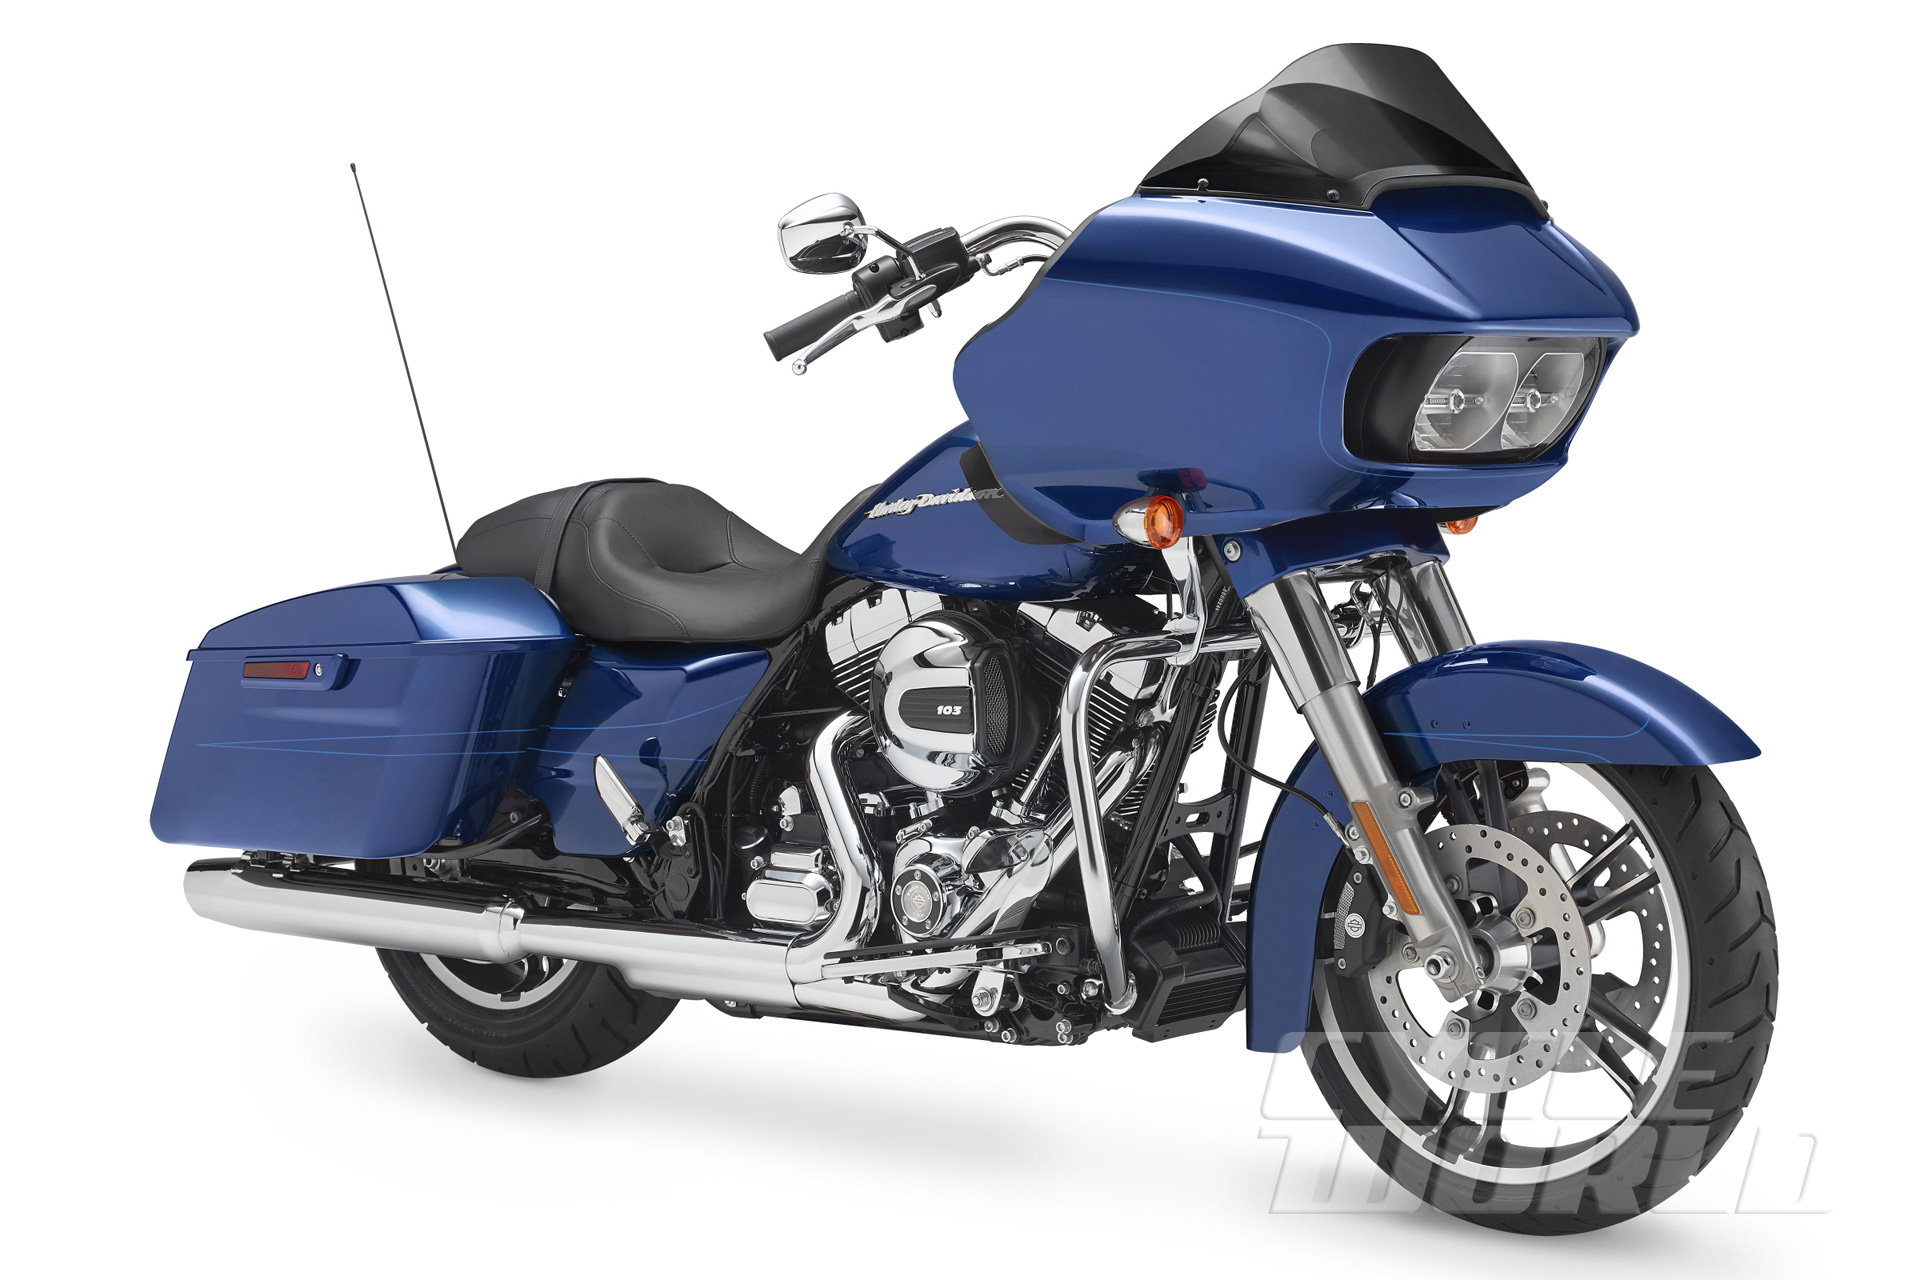 2015 Harley Davidson Road Glide First Look Review Photos Specifications Cycle World